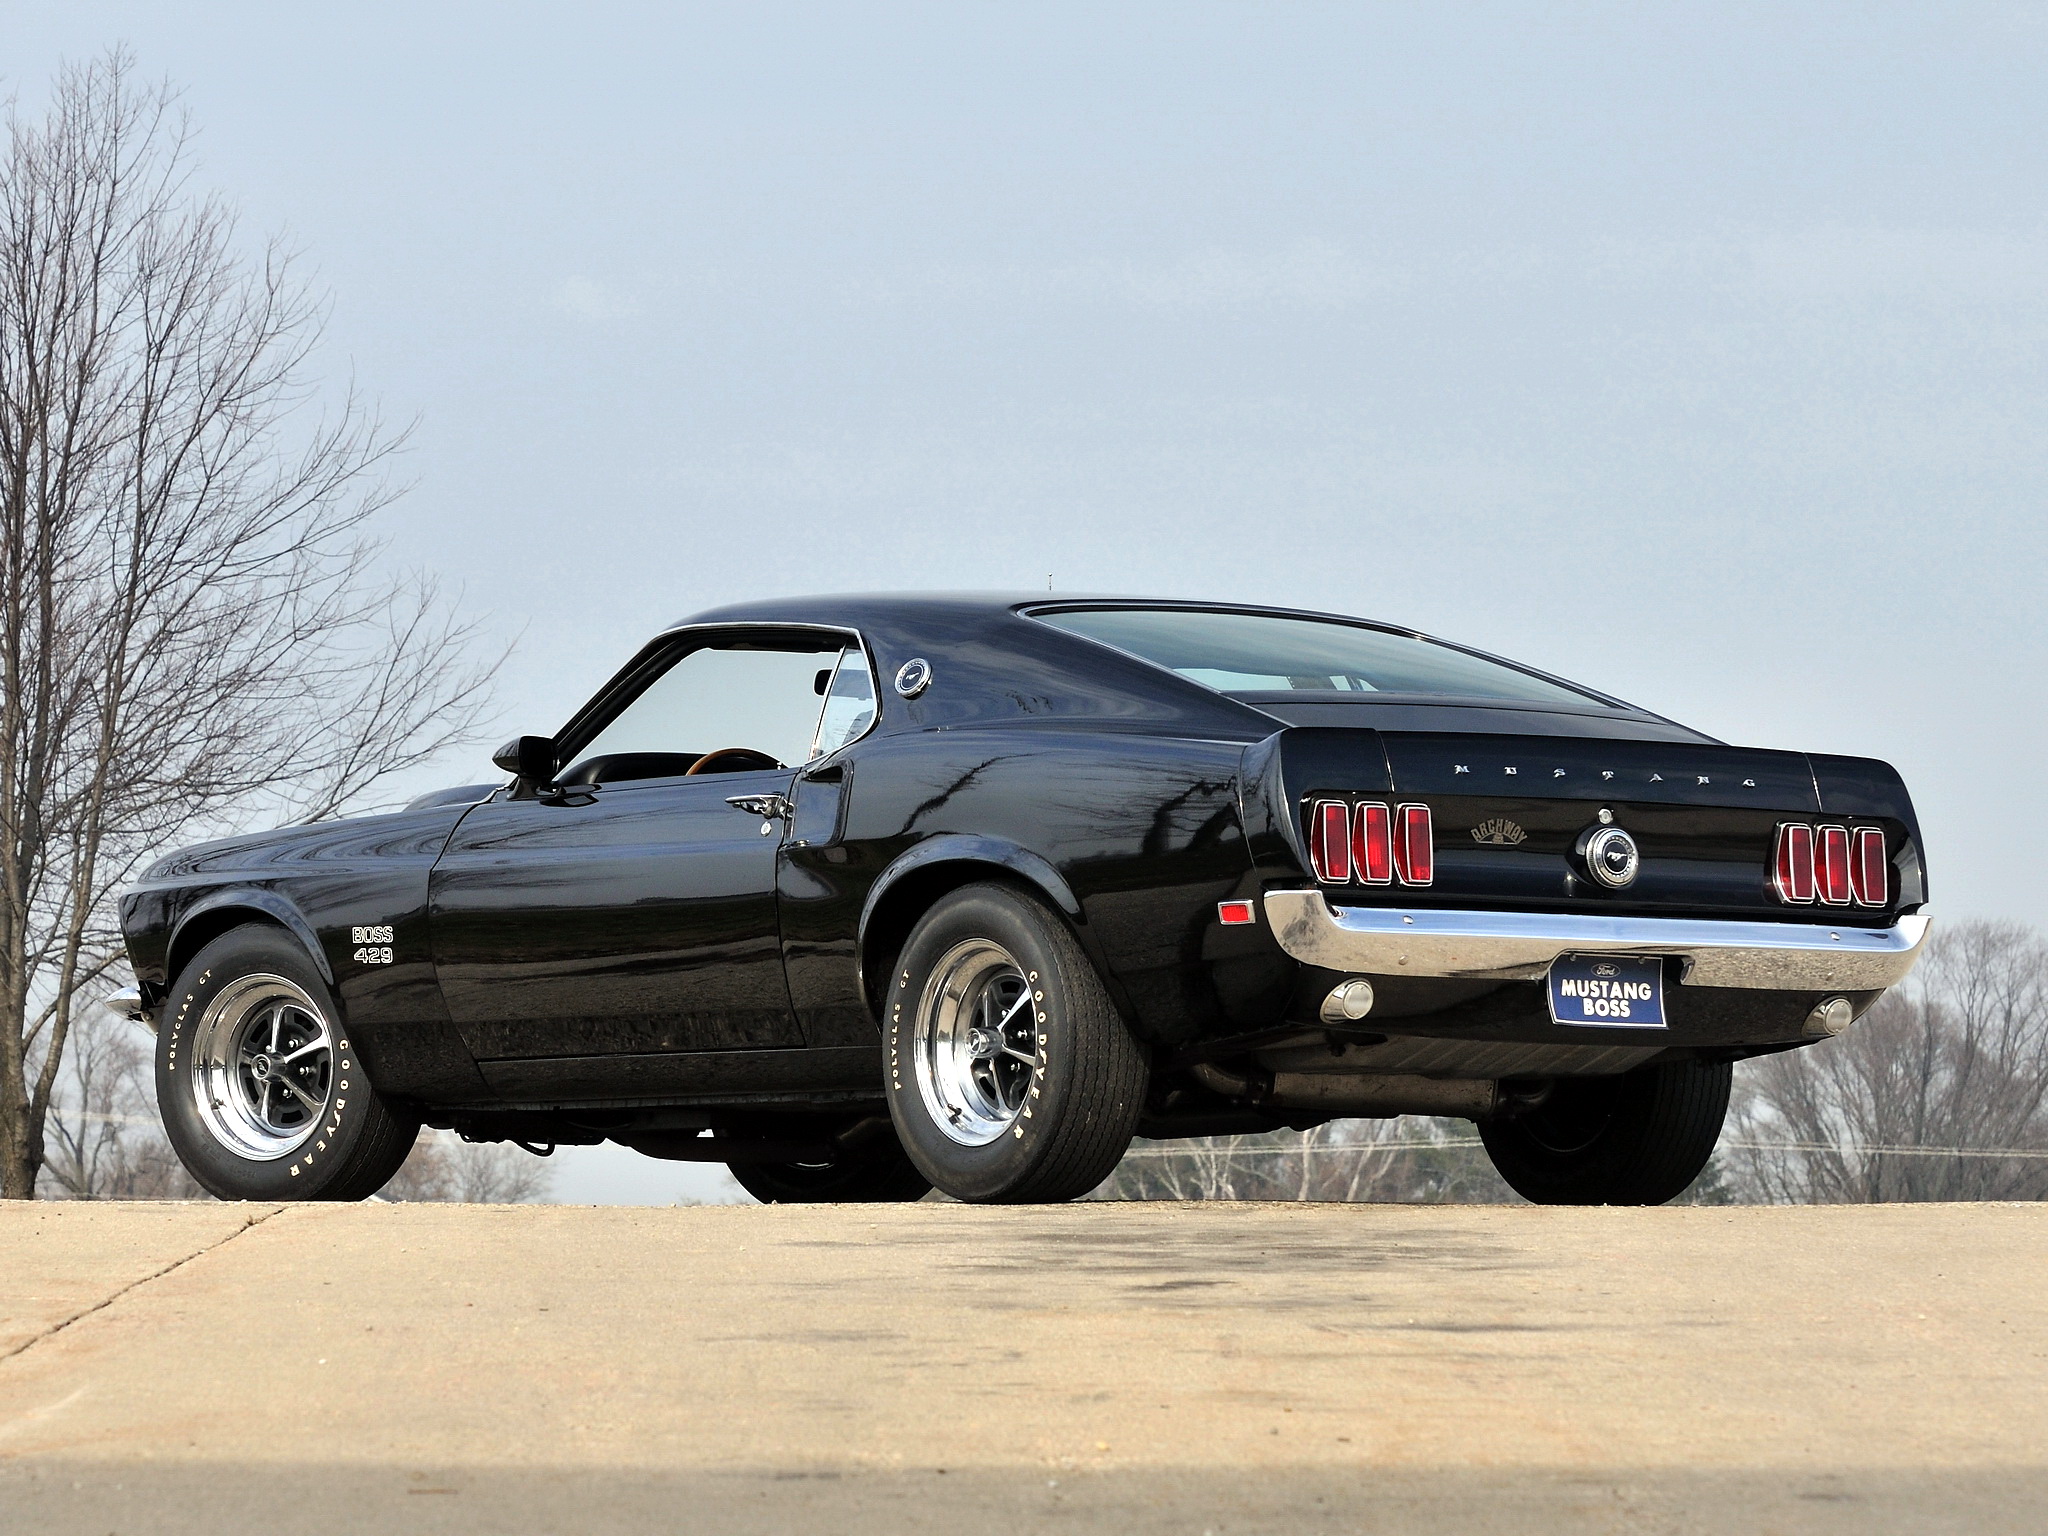 Mustang Boss Ford Muscle Classic Wallpaper Background